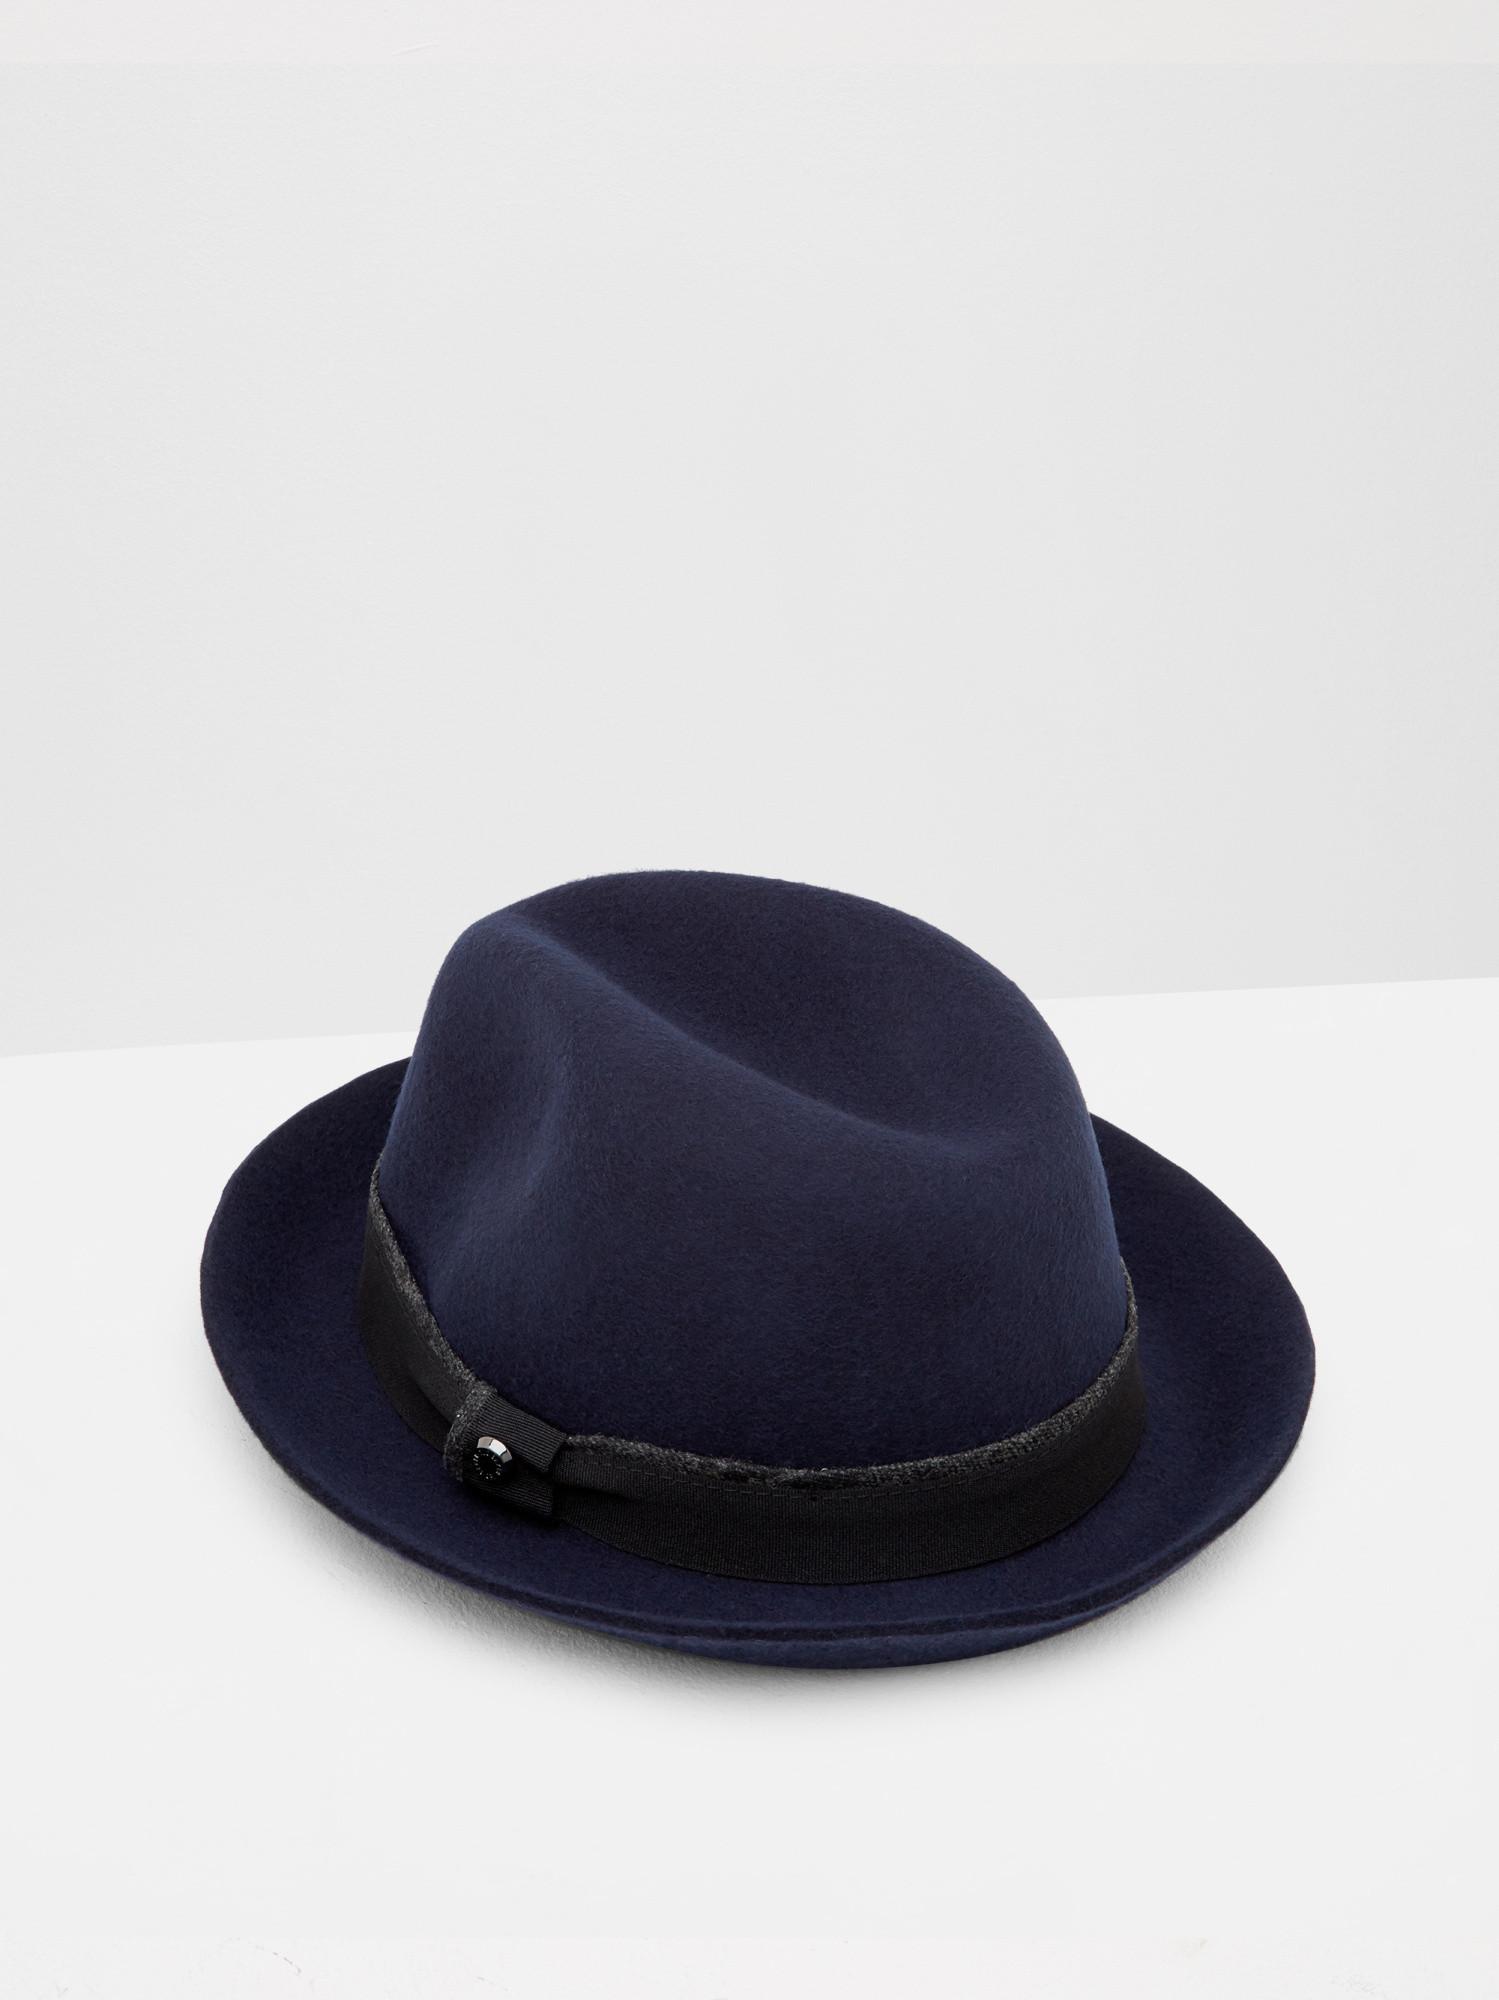 Lyst - Ted Baker Contrast Band Fedora Hat in Blue for Men